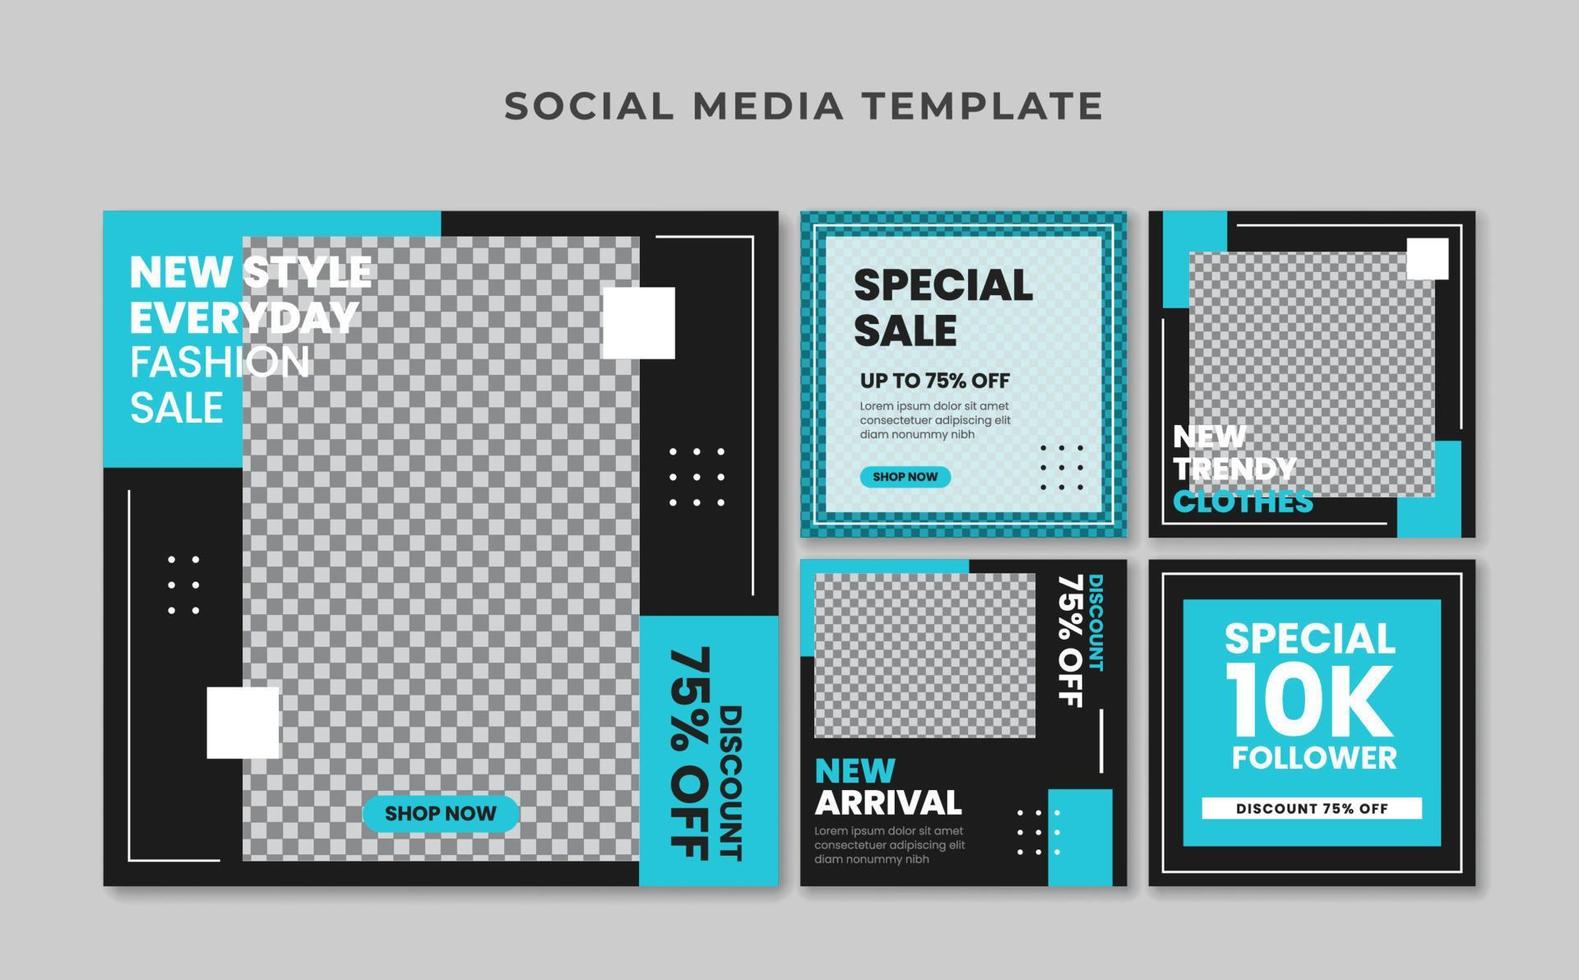 New style everyday social media template vector